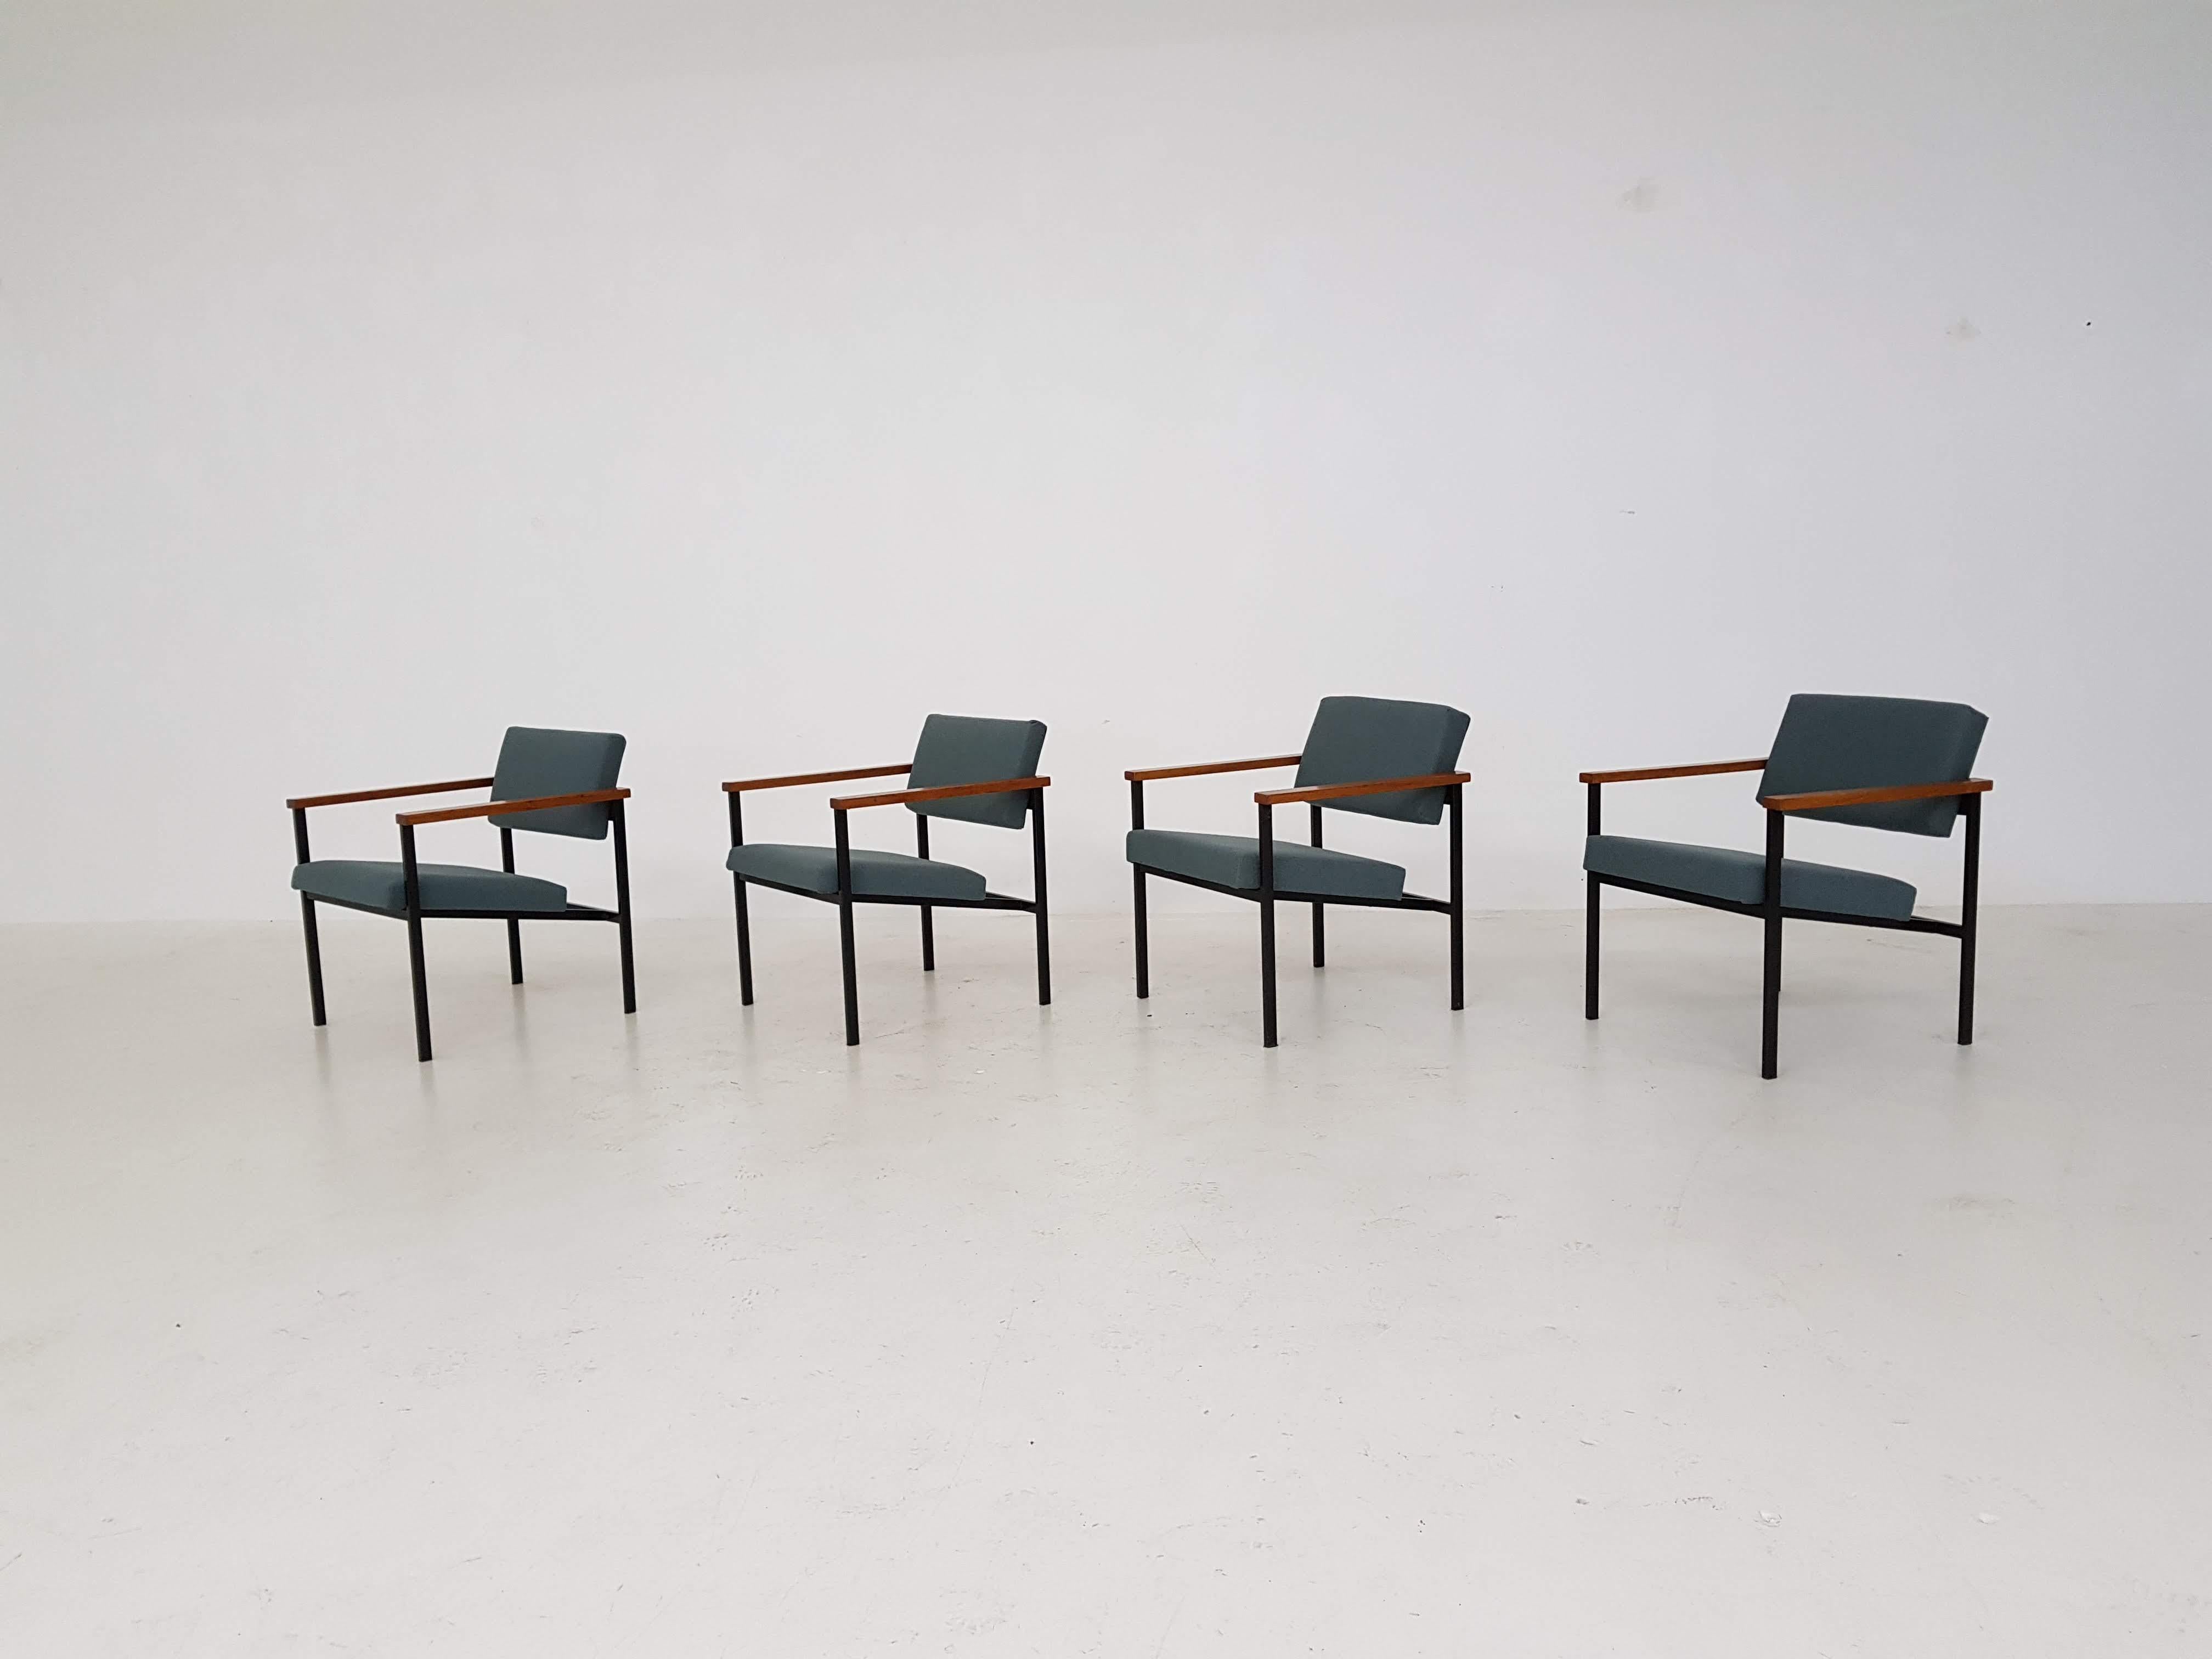 Black metal frame with wooden arm rests. New filling and new green upholstery.

Measure: Width 58 cm; seating: 47 cm
Depth 60 cm; seating 43 cm
Height 66 cm; seating 40 cm.